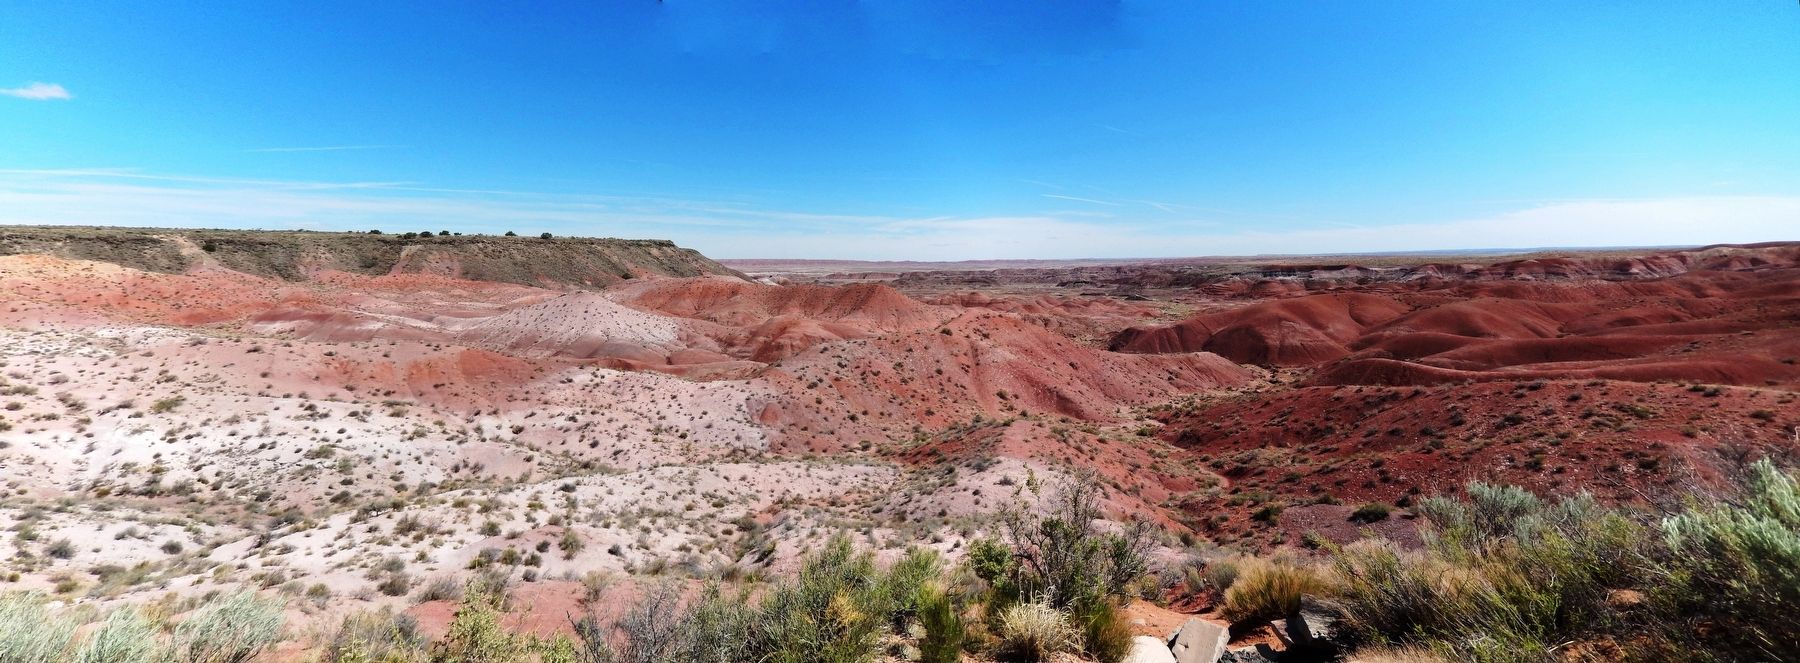 Painted Desert (<i>looking north from marker</i>)</center> image. Click for full size.